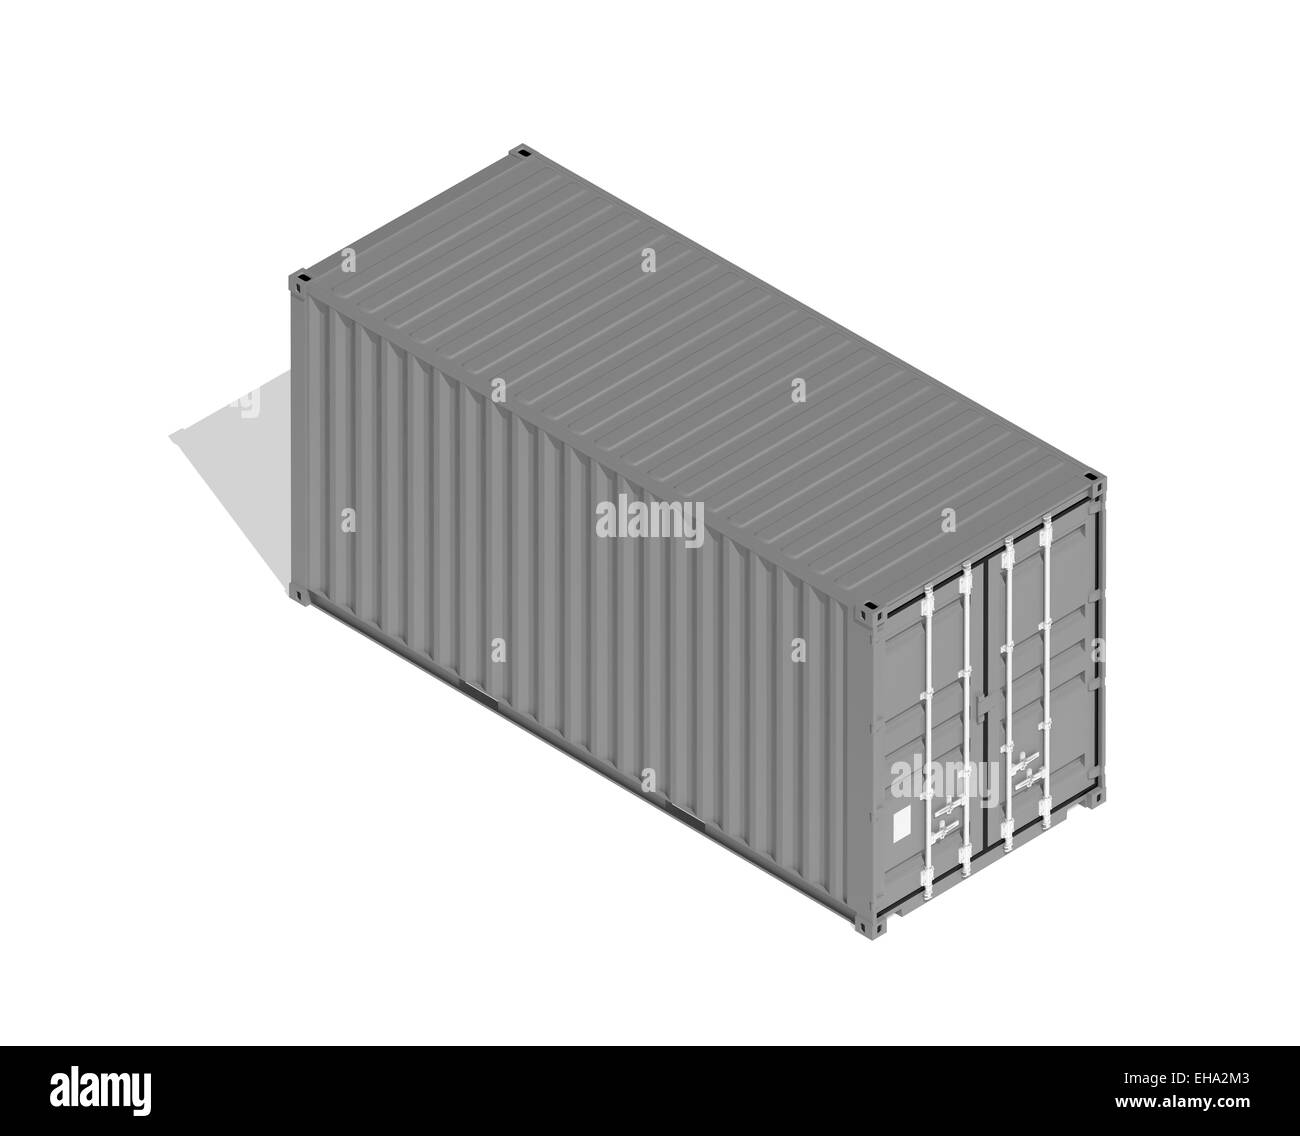 Gray metal freight shipping container isolated on white, industrial cargo transportation object. 3d illustration, isometric proj Stock Photo